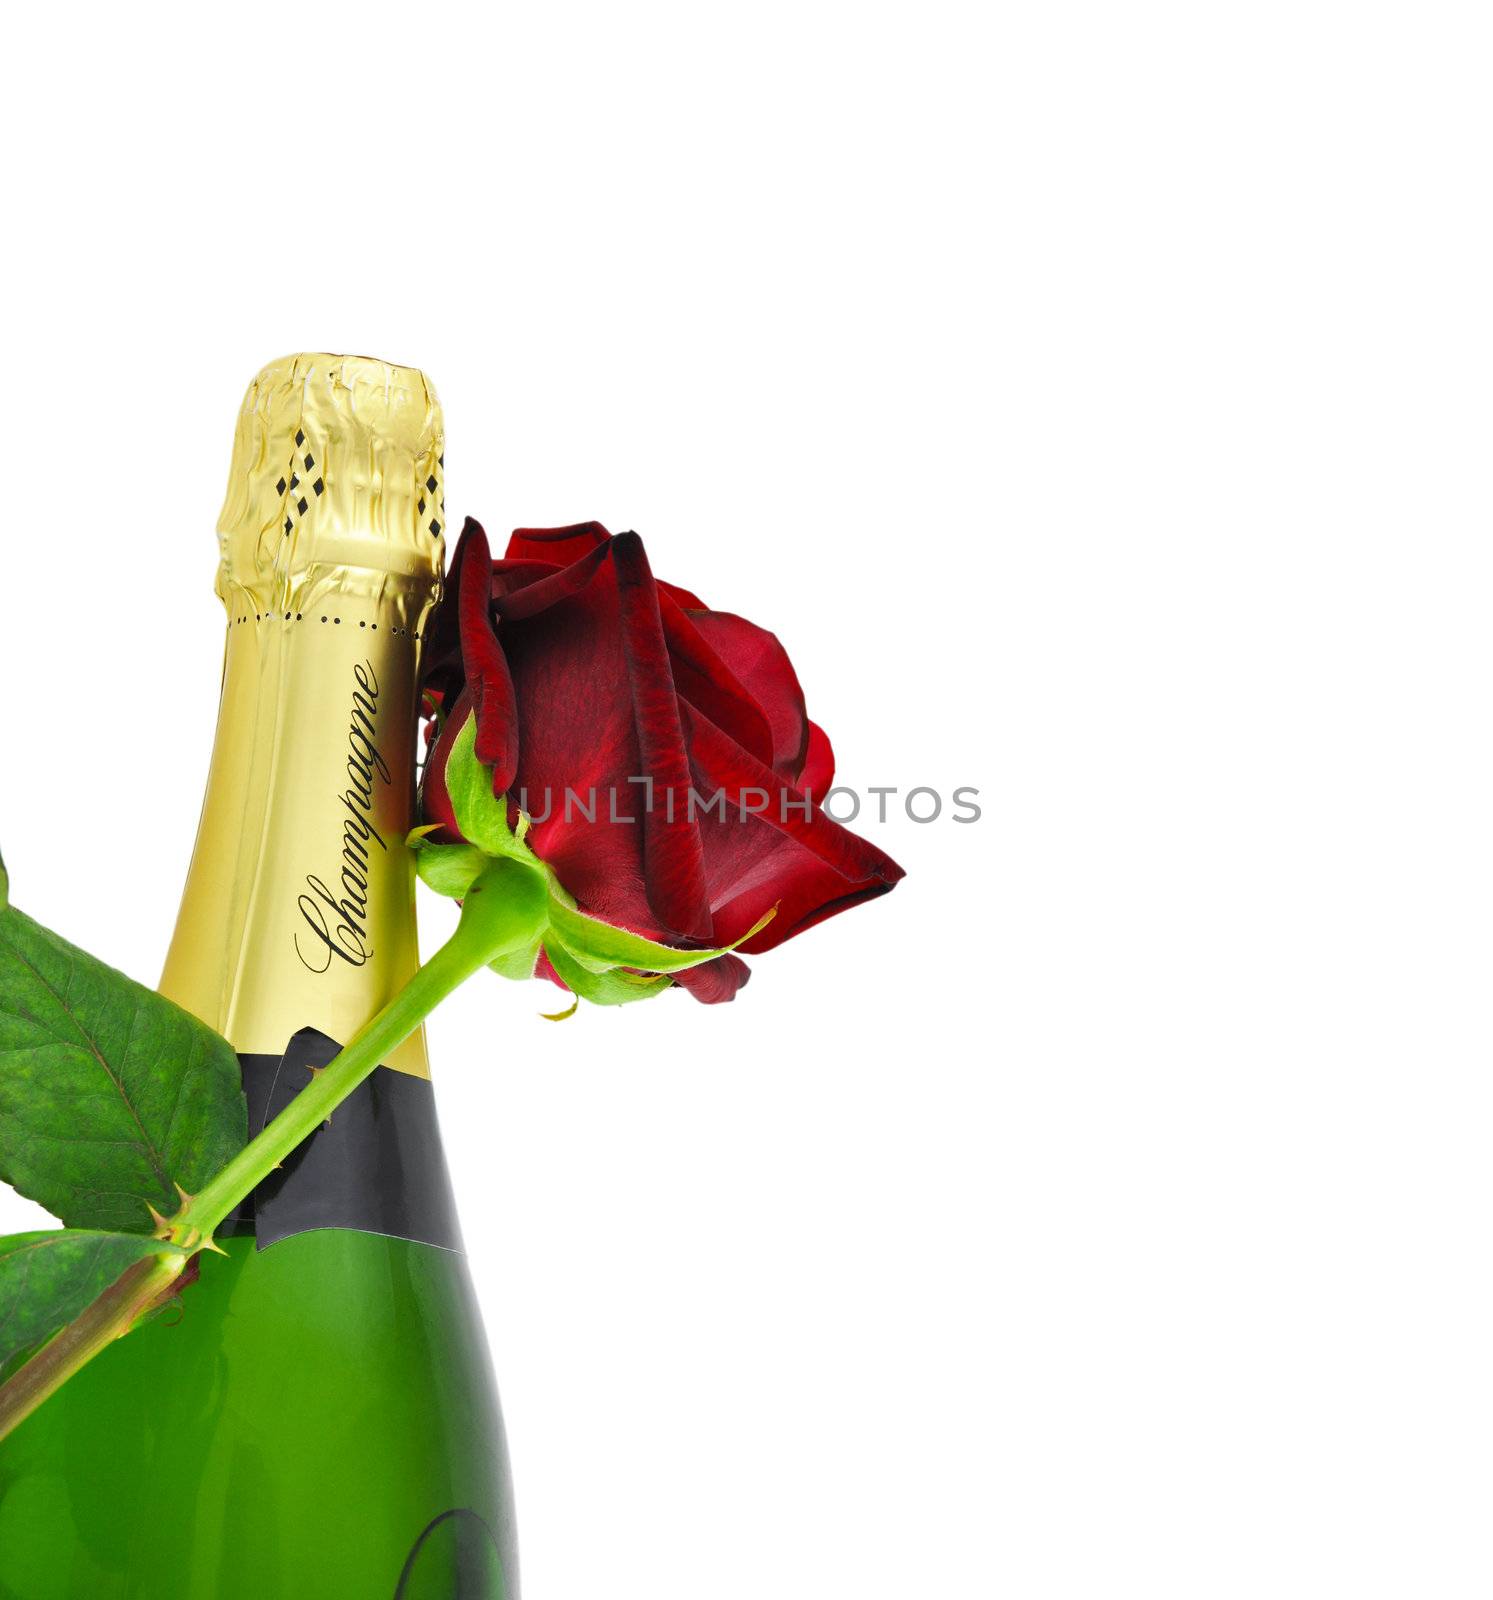 Champagne and a red rose, romantic concept